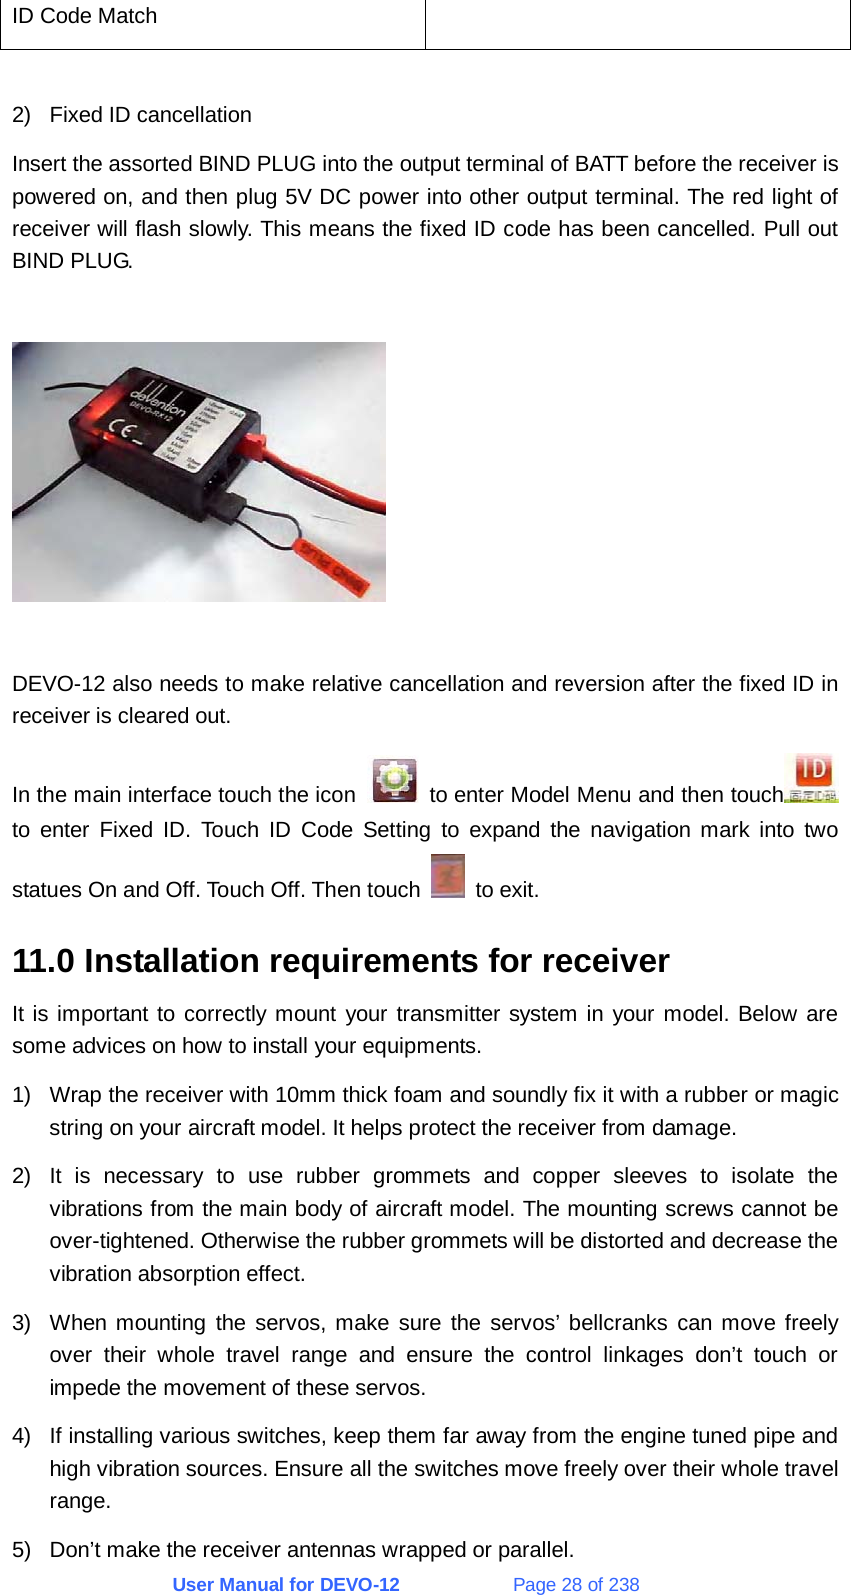 User Manual for DEVO-12             Page 28 of 238 ID Code Match    2)  Fixed ID cancellation Insert the assorted BIND PLUG into the output terminal of BATT before the receiver is powered on, and then plug 5V DC power into other output terminal. The red light of receiver will flash slowly. This means the fixed ID code has been cancelled. Pull out BIND PLUG.    DEVO-12 also needs to make relative cancellation and reversion after the fixed ID in receiver is cleared out. In the main interface touch the icon    to enter Model Menu and then touch  to enter Fixed ID. Touch ID Code Setting to expand the navigation mark into two statues On and Off. Touch Off. Then touch   to exit. 11.0 Installation requirements for receiver It is important to correctly mount your transmitter system in your model. Below are some advices on how to install your equipments. 1)  Wrap the receiver with 10mm thick foam and soundly fix it with a rubber or magic string on your aircraft model. It helps protect the receiver from damage. 2)  It is necessary to use rubber grommets and copper sleeves to isolate the vibrations from the main body of aircraft model. The mounting screws cannot be over-tightened. Otherwise the rubber grommets will be distorted and decrease the vibration absorption effect. 3)  When mounting the servos, make sure the servos’ bellcranks can move freely over their whole travel range and ensure the control linkages don’t touch or impede the movement of these servos. 4)  If installing various switches, keep them far away from the engine tuned pipe and high vibration sources. Ensure all the switches move freely over their whole travel range. 5)  Don’t make the receiver antennas wrapped or parallel. 